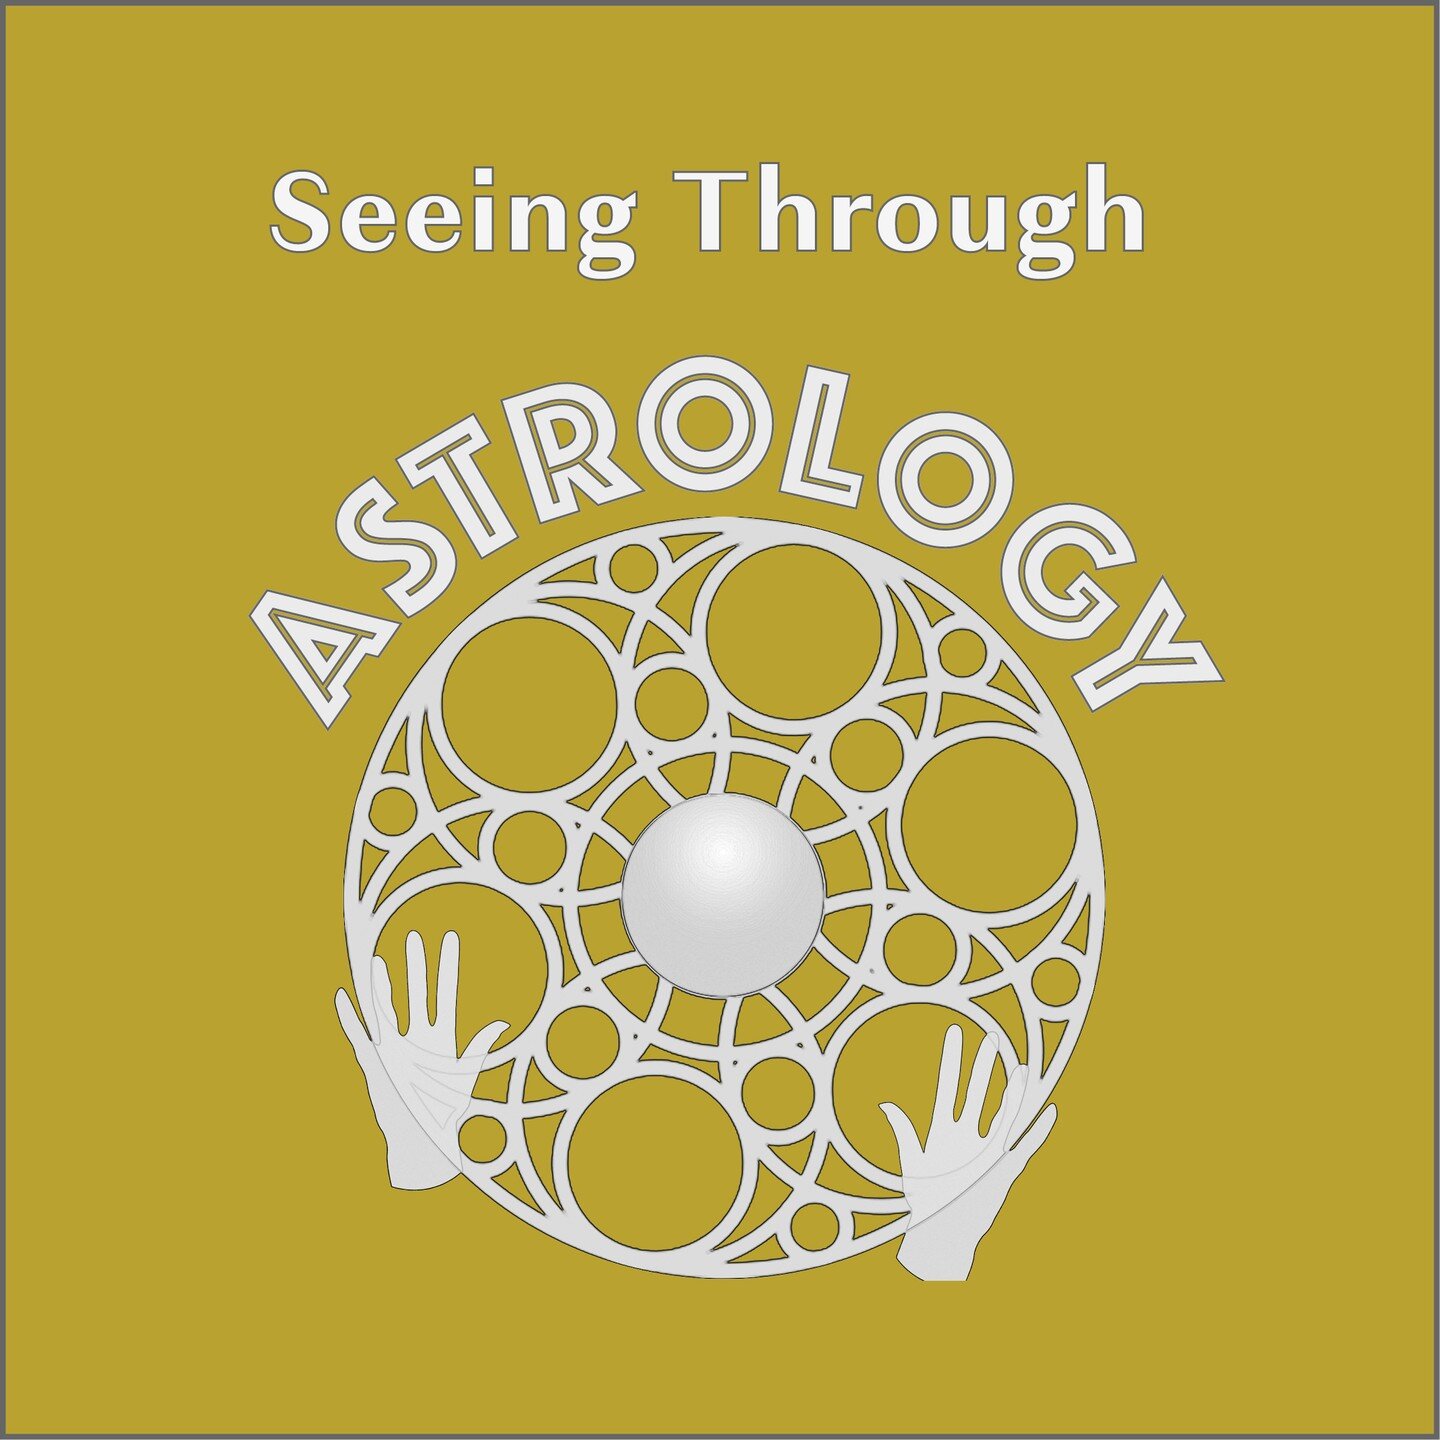 Archetypal images give shape to human understanding. Hillman referred to this as &ldquo;seeing through&rdquo; ideas and images. Seeing Through Astrology is my monthly workbook series on the archetypes of the zodiac. Each sign is an aspect of human ex